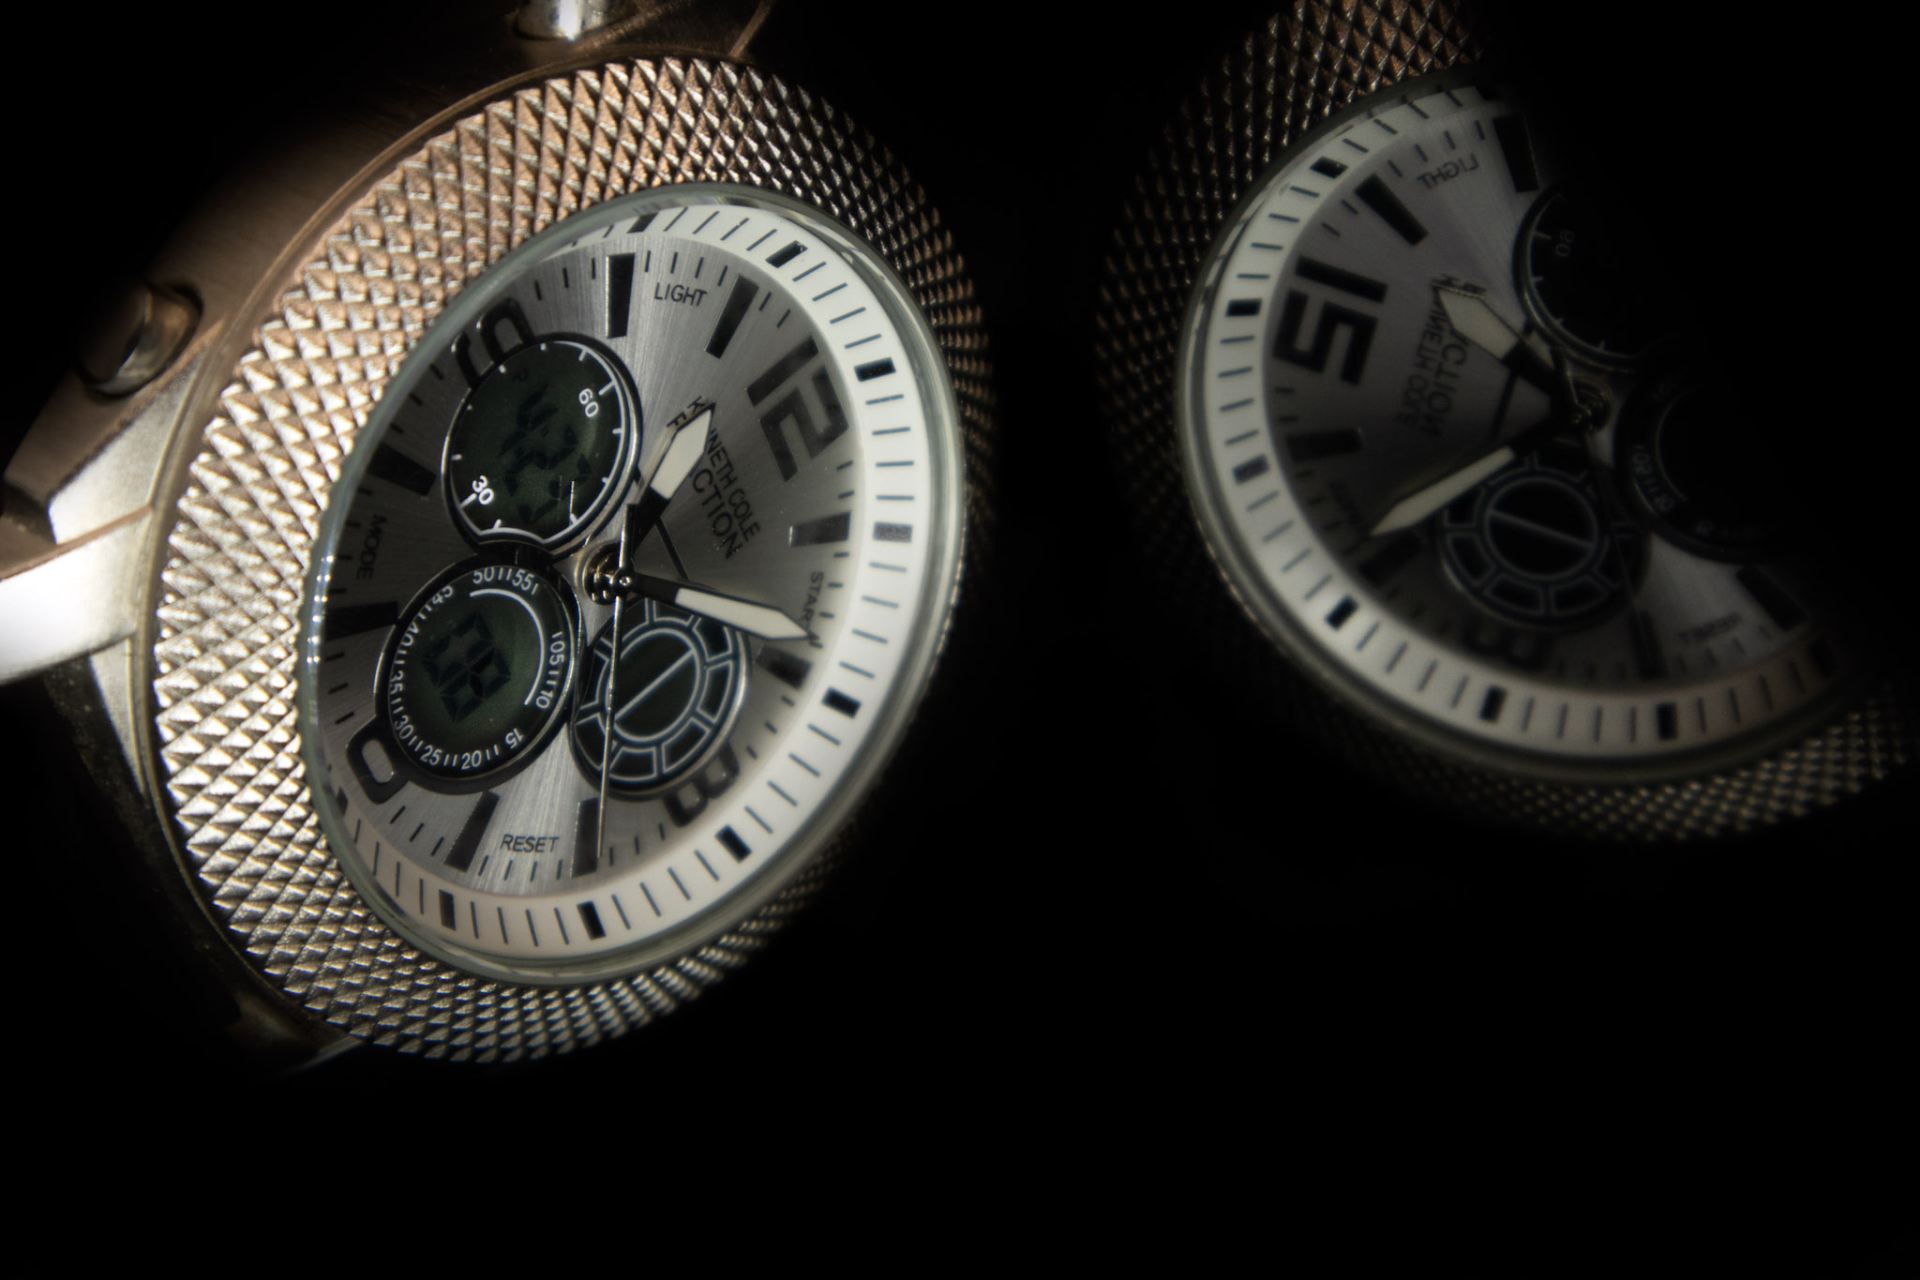 Reflection of a watch.